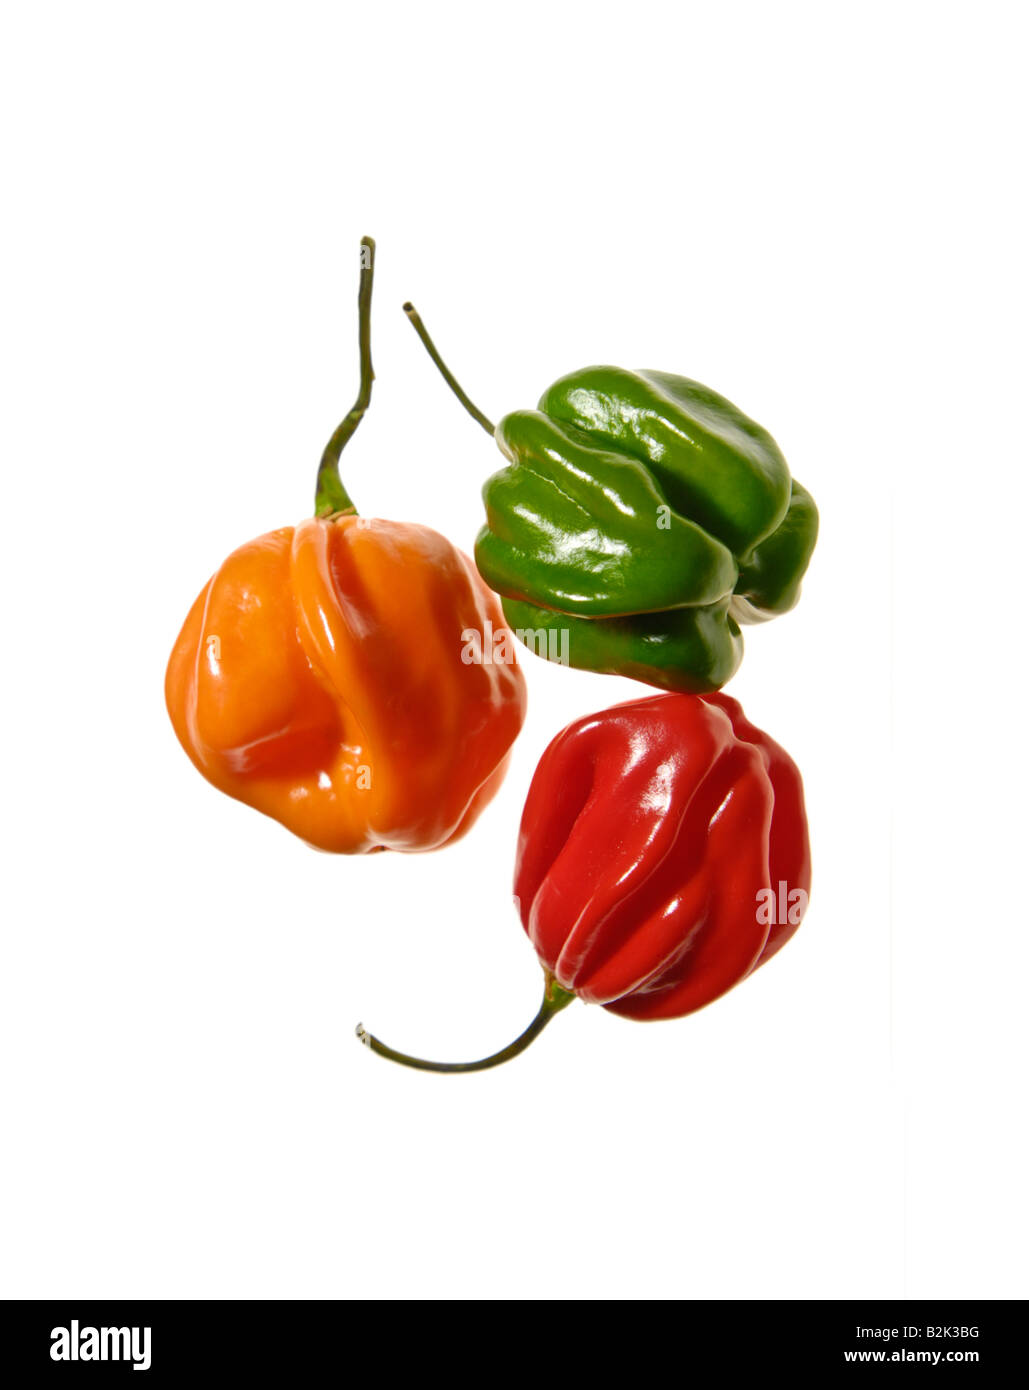 Capsicum chinense sinense habaneros very hot hottest PEPPERS fresh red green orange yellow pepper chilli chilly chili FOOD Stock Photo